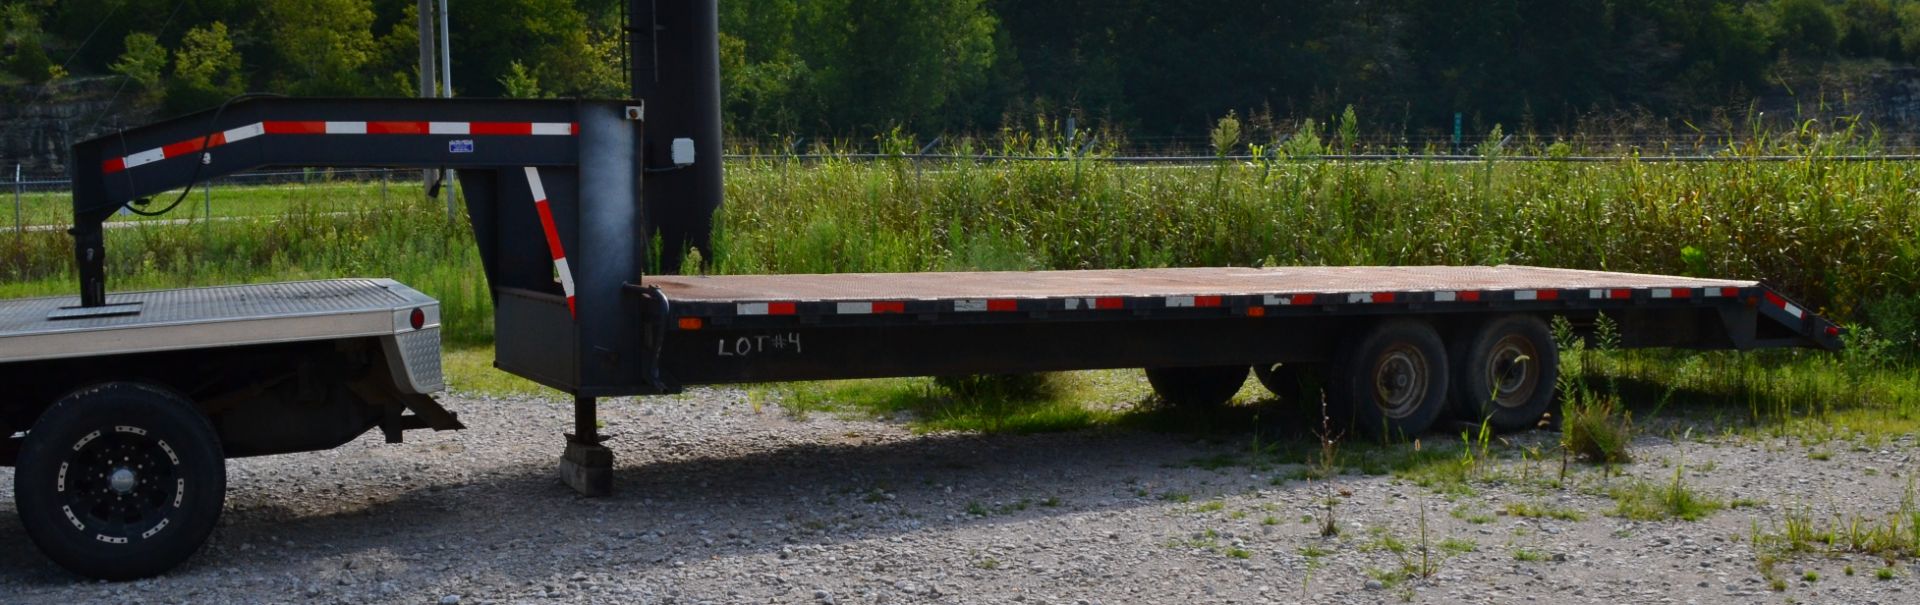 1996 David Utility Trailers 24' Tandem Axle Flatbed Gooseneck Trailer With Dovetail